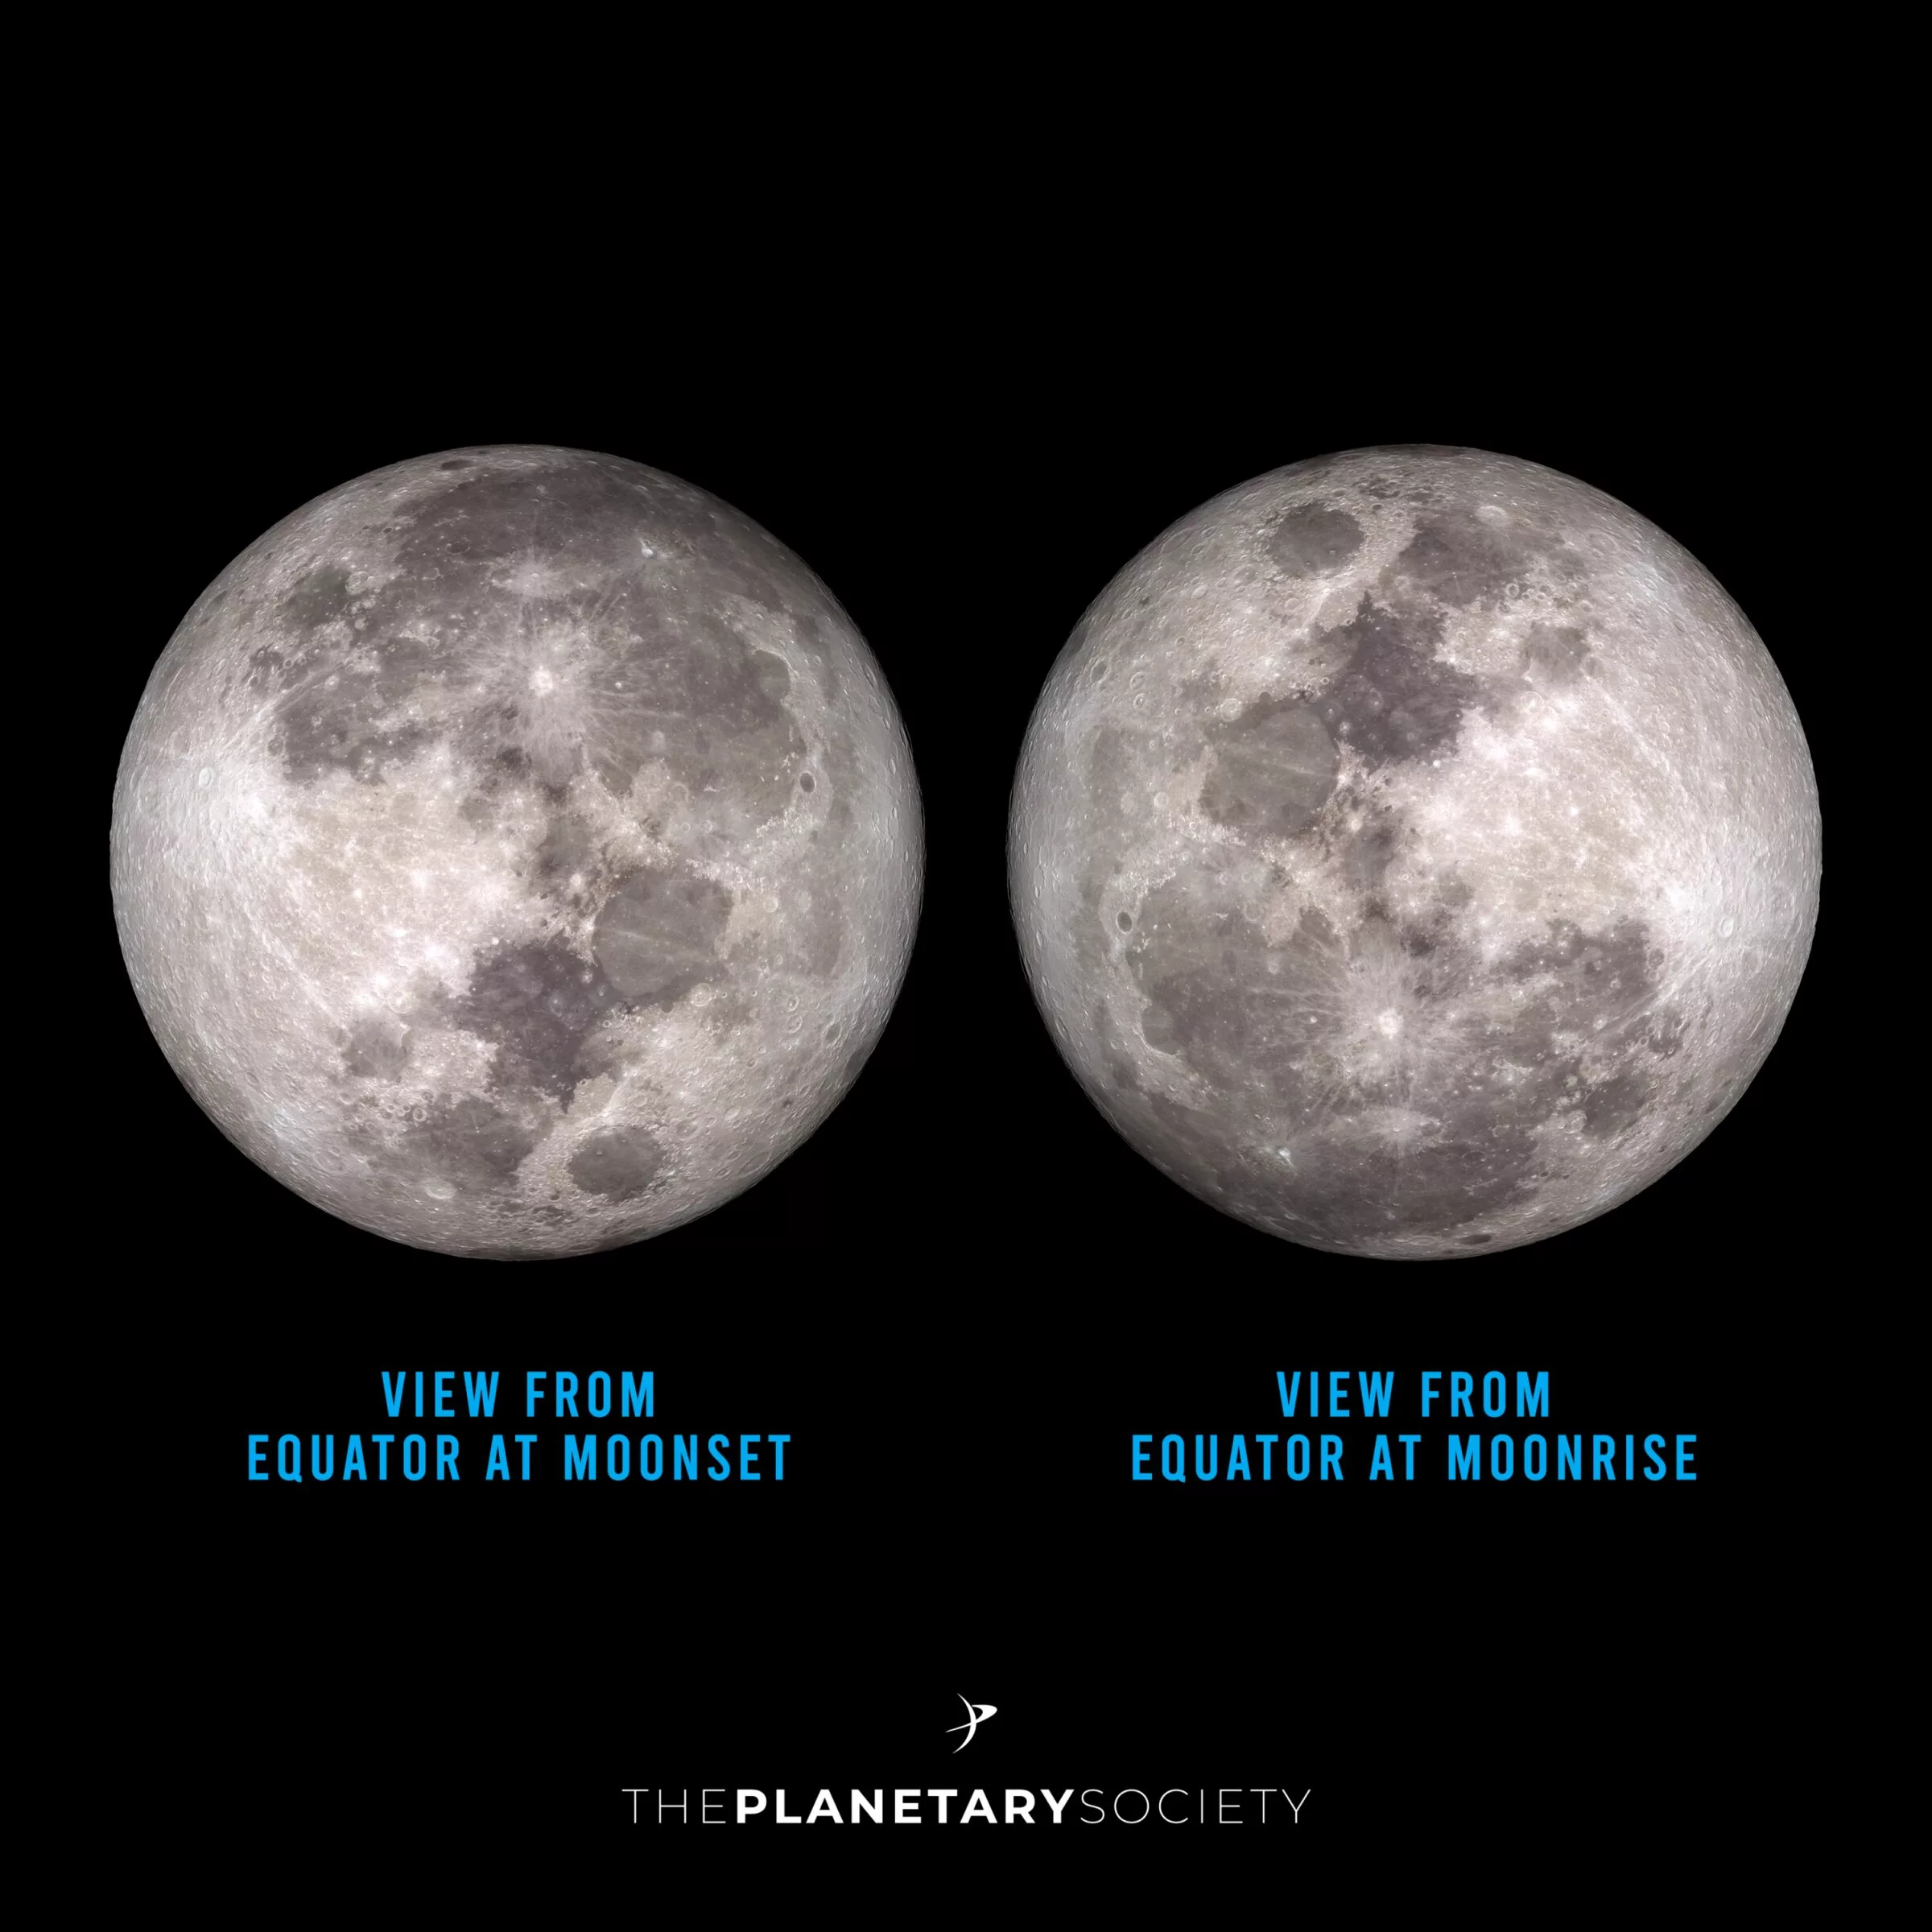 Thought Experiment: Projecting an image onto the moon Equator-moon-flip.jpg